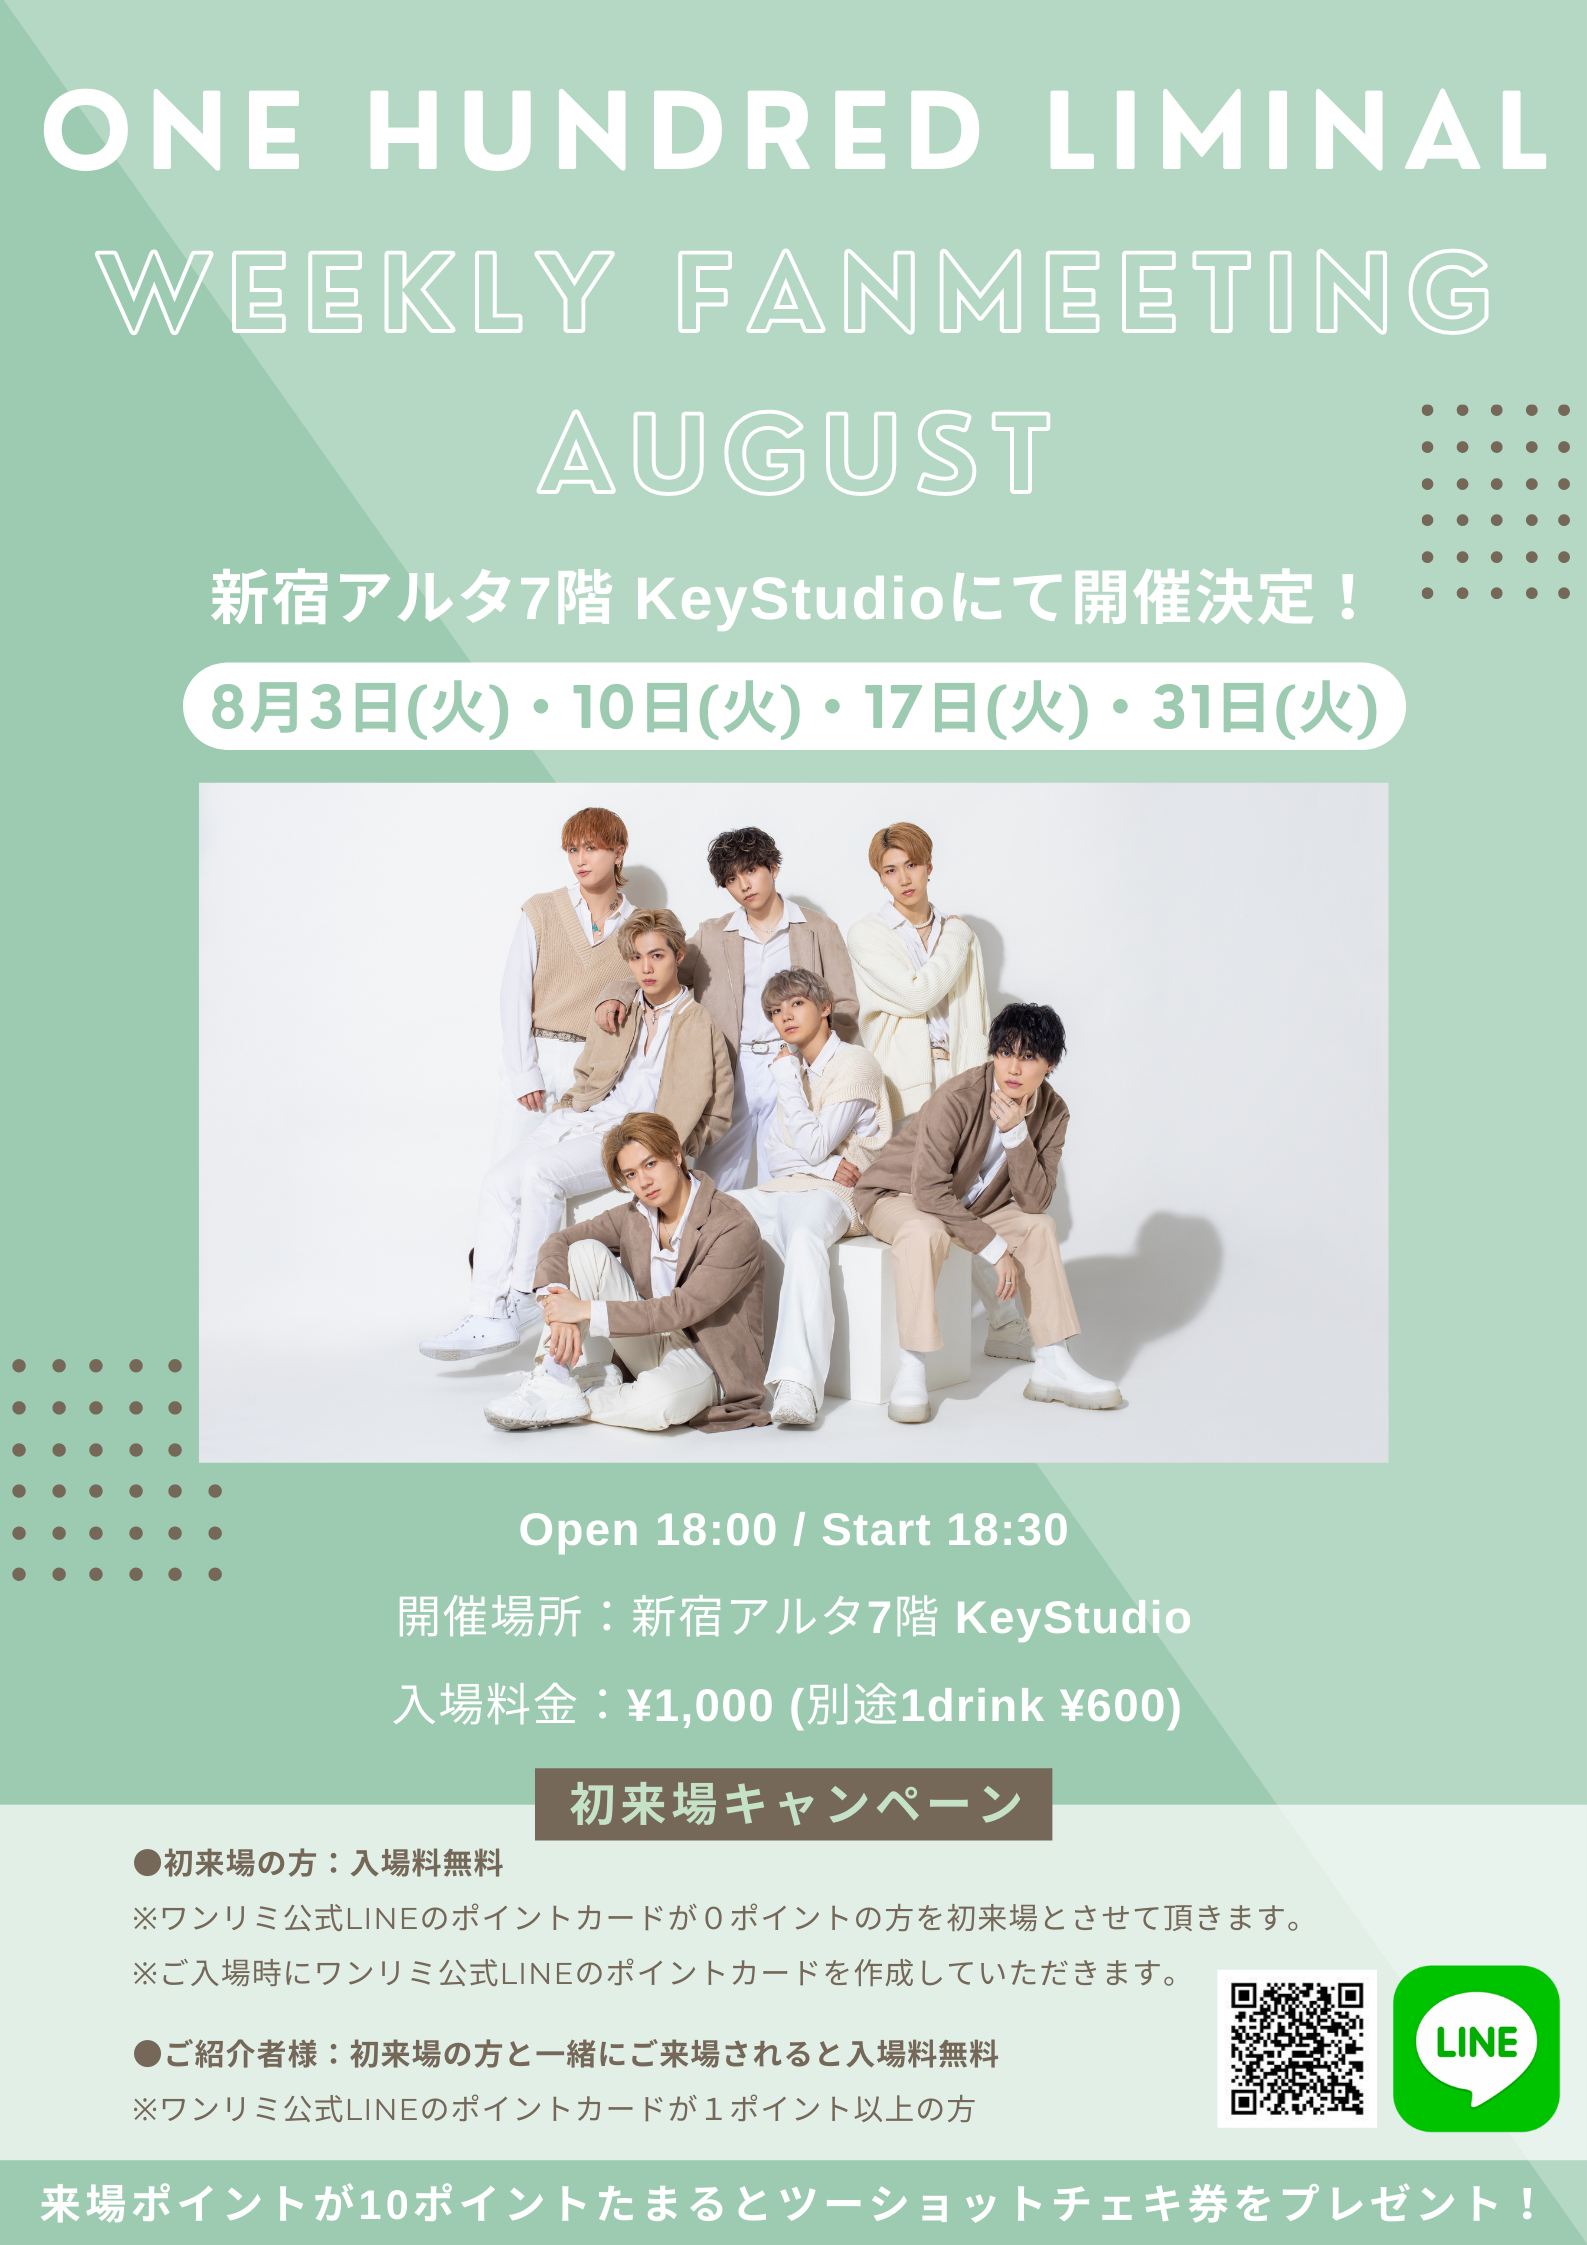 Weekly FanMeeting August 08.31